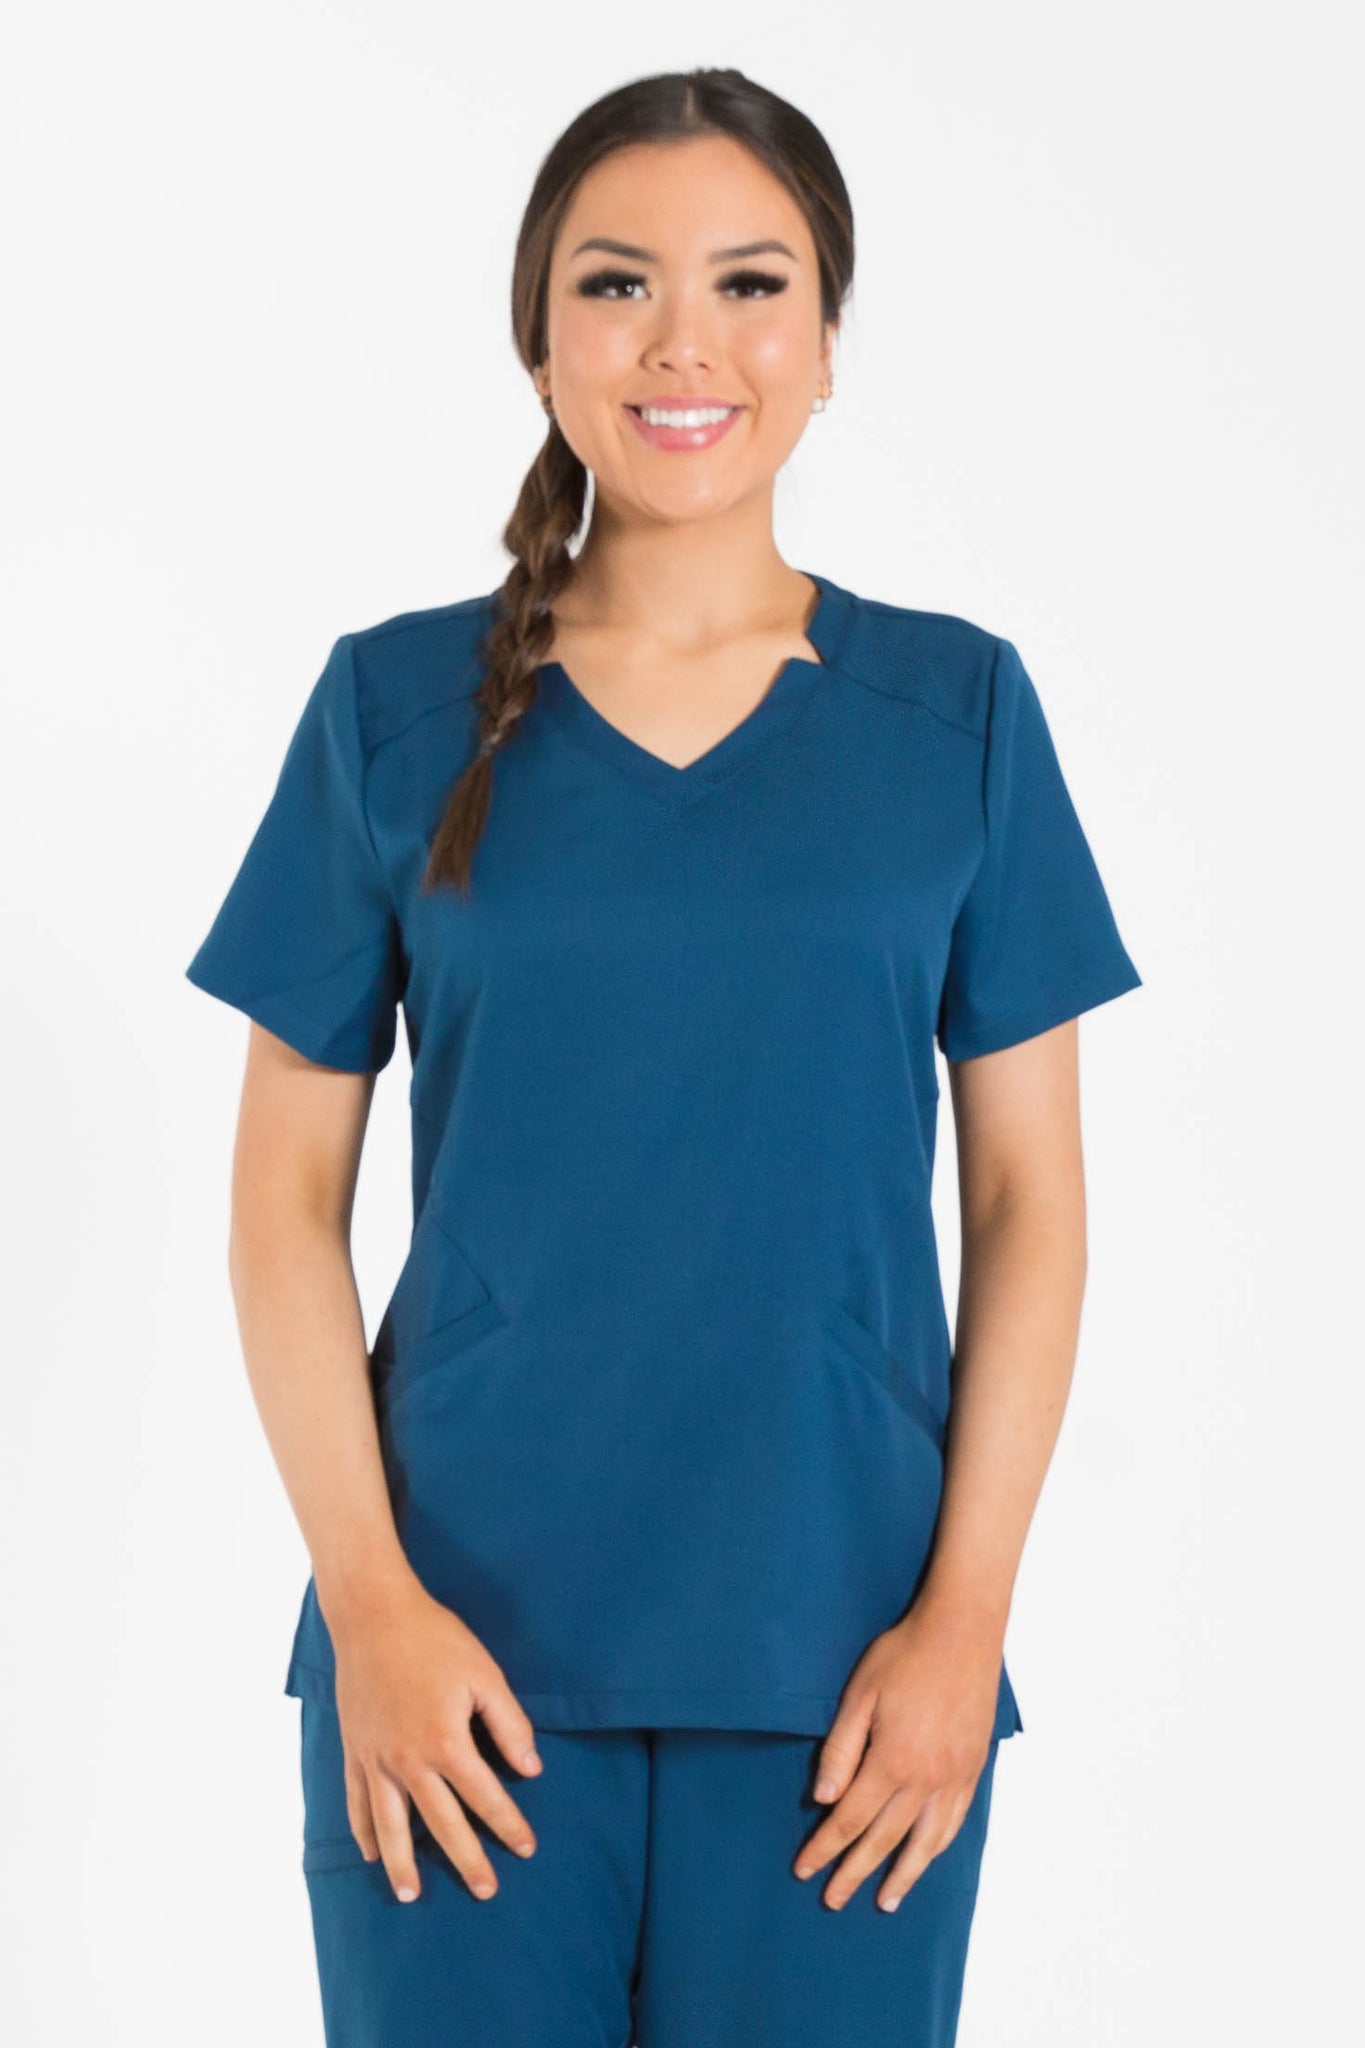 CARE BEAR Scrub Tops. 100% Cotton. for All Healthcare and Medical  Professionals nurses, Doctors, Dentists & Vets. -  Denmark